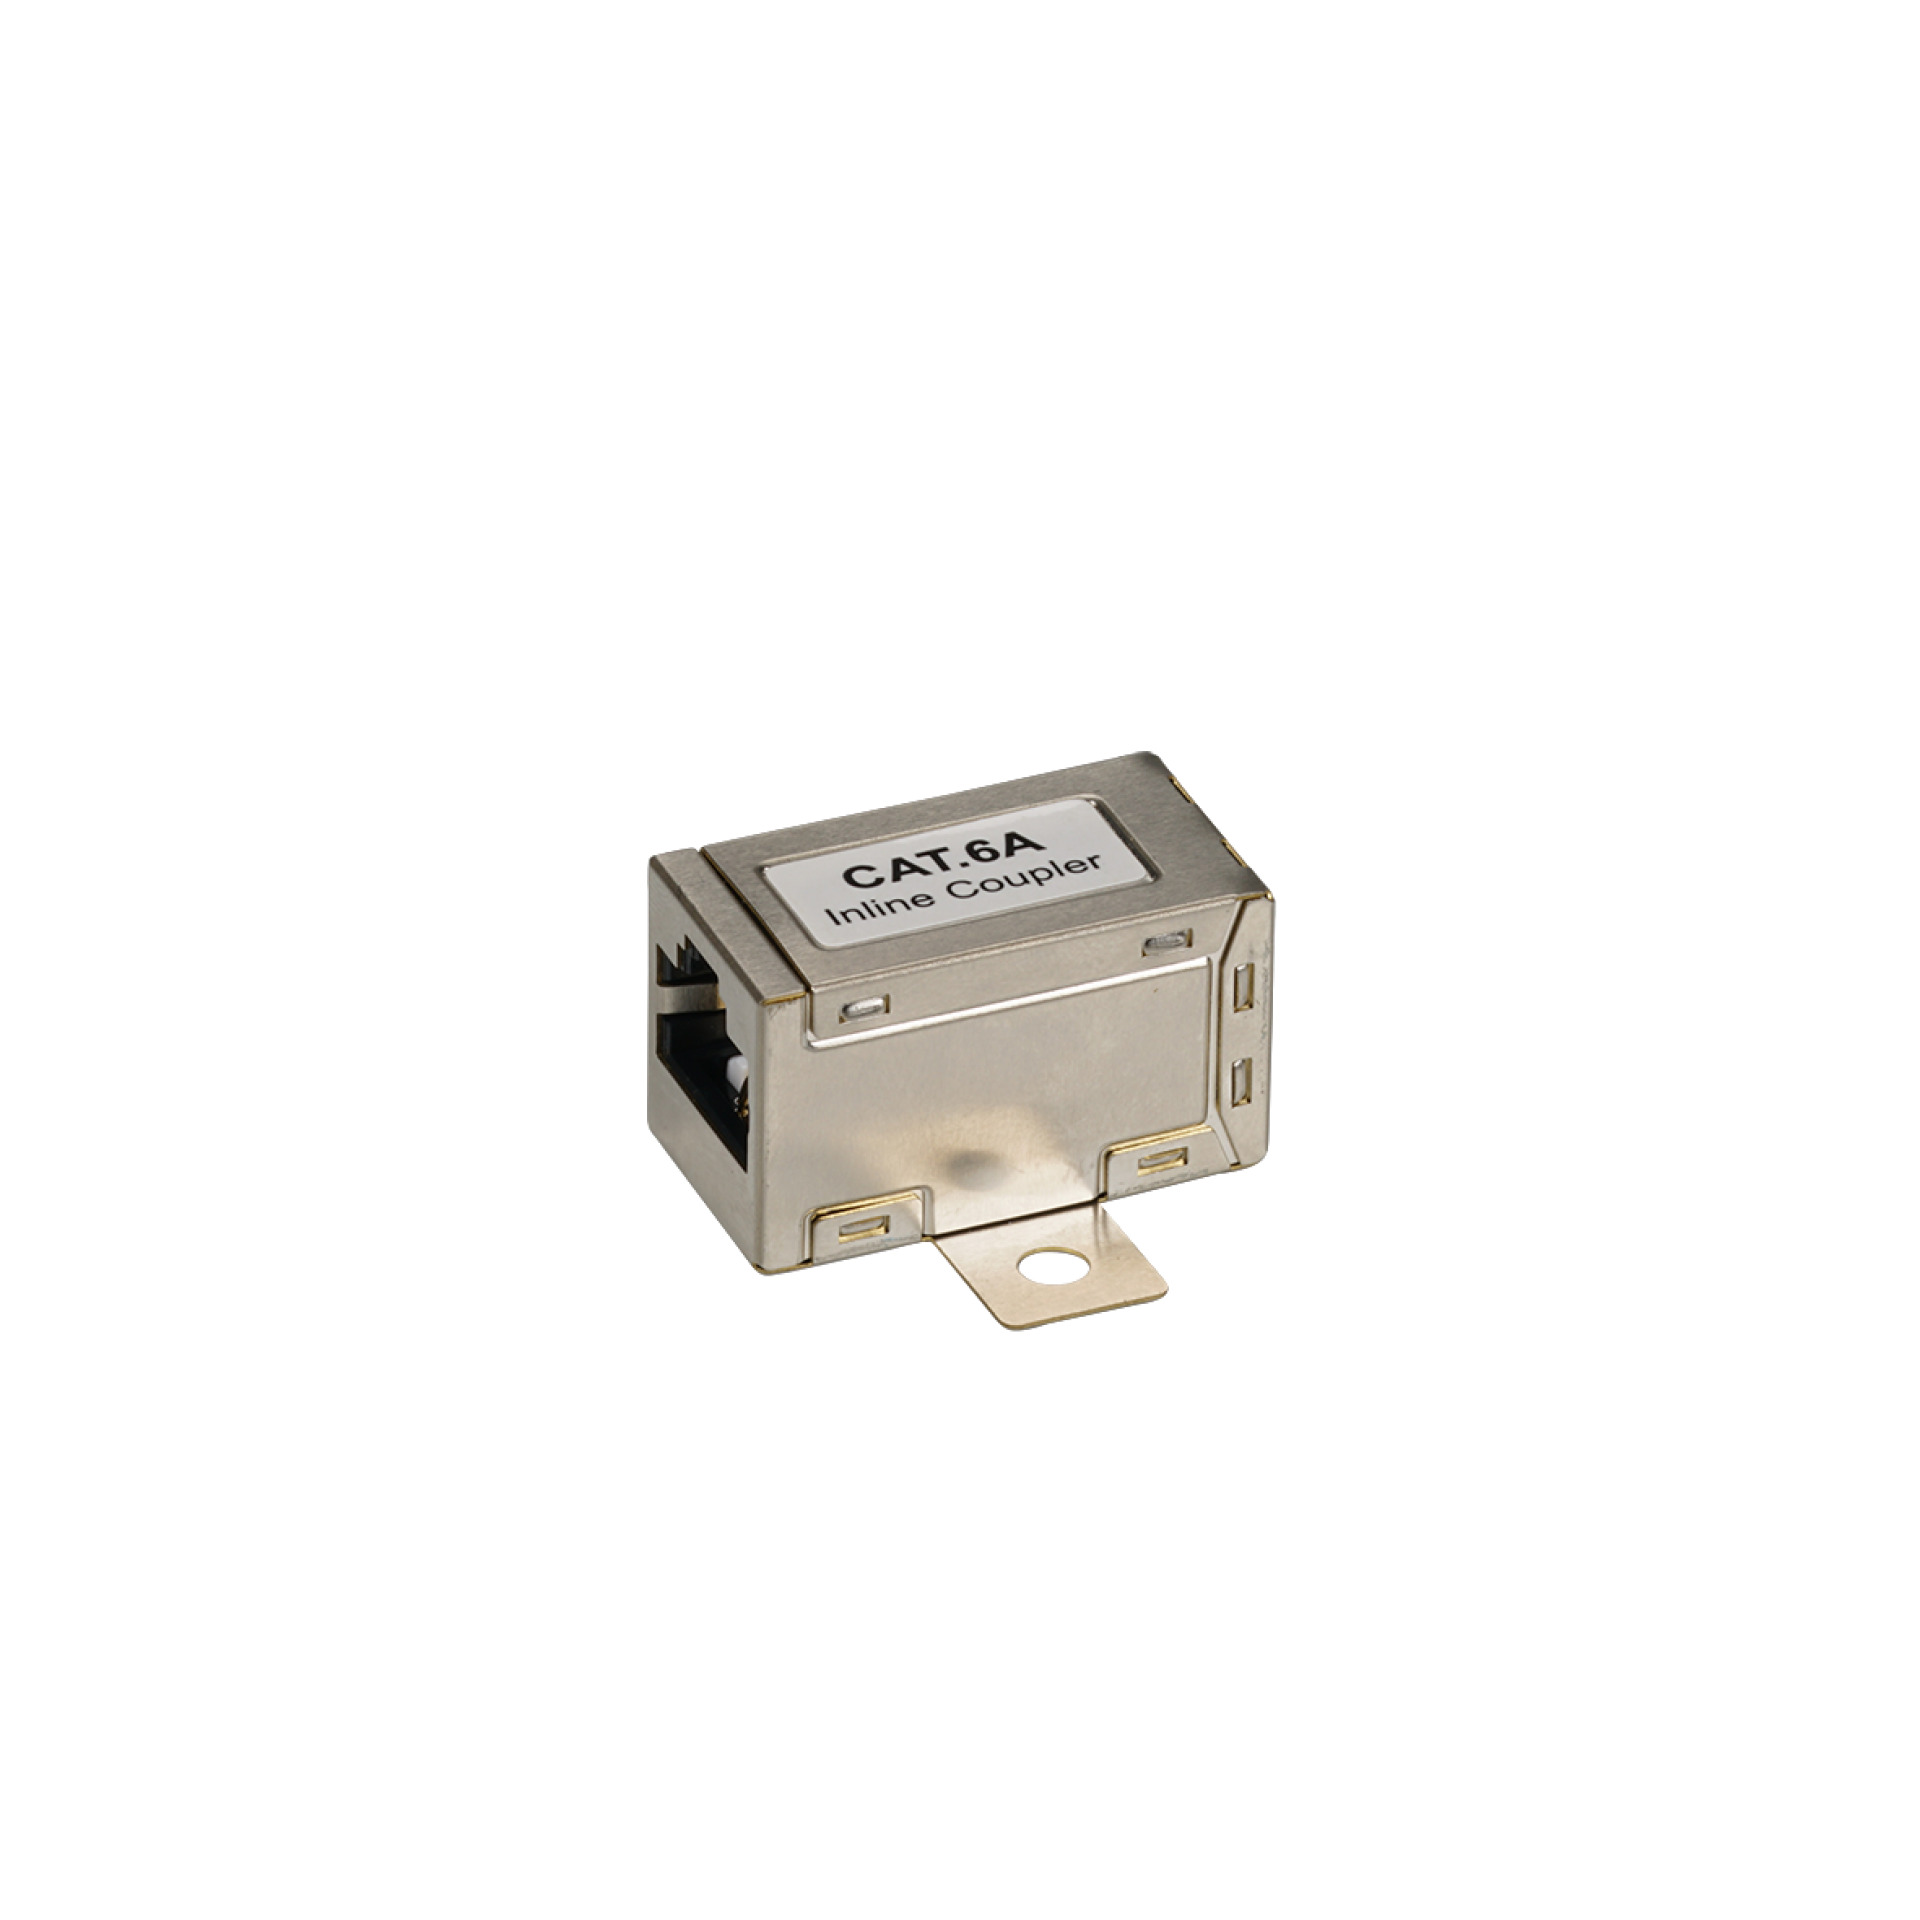 Modular-Adapter RJ45 STP, Cat.6A, with flange for wall mounting